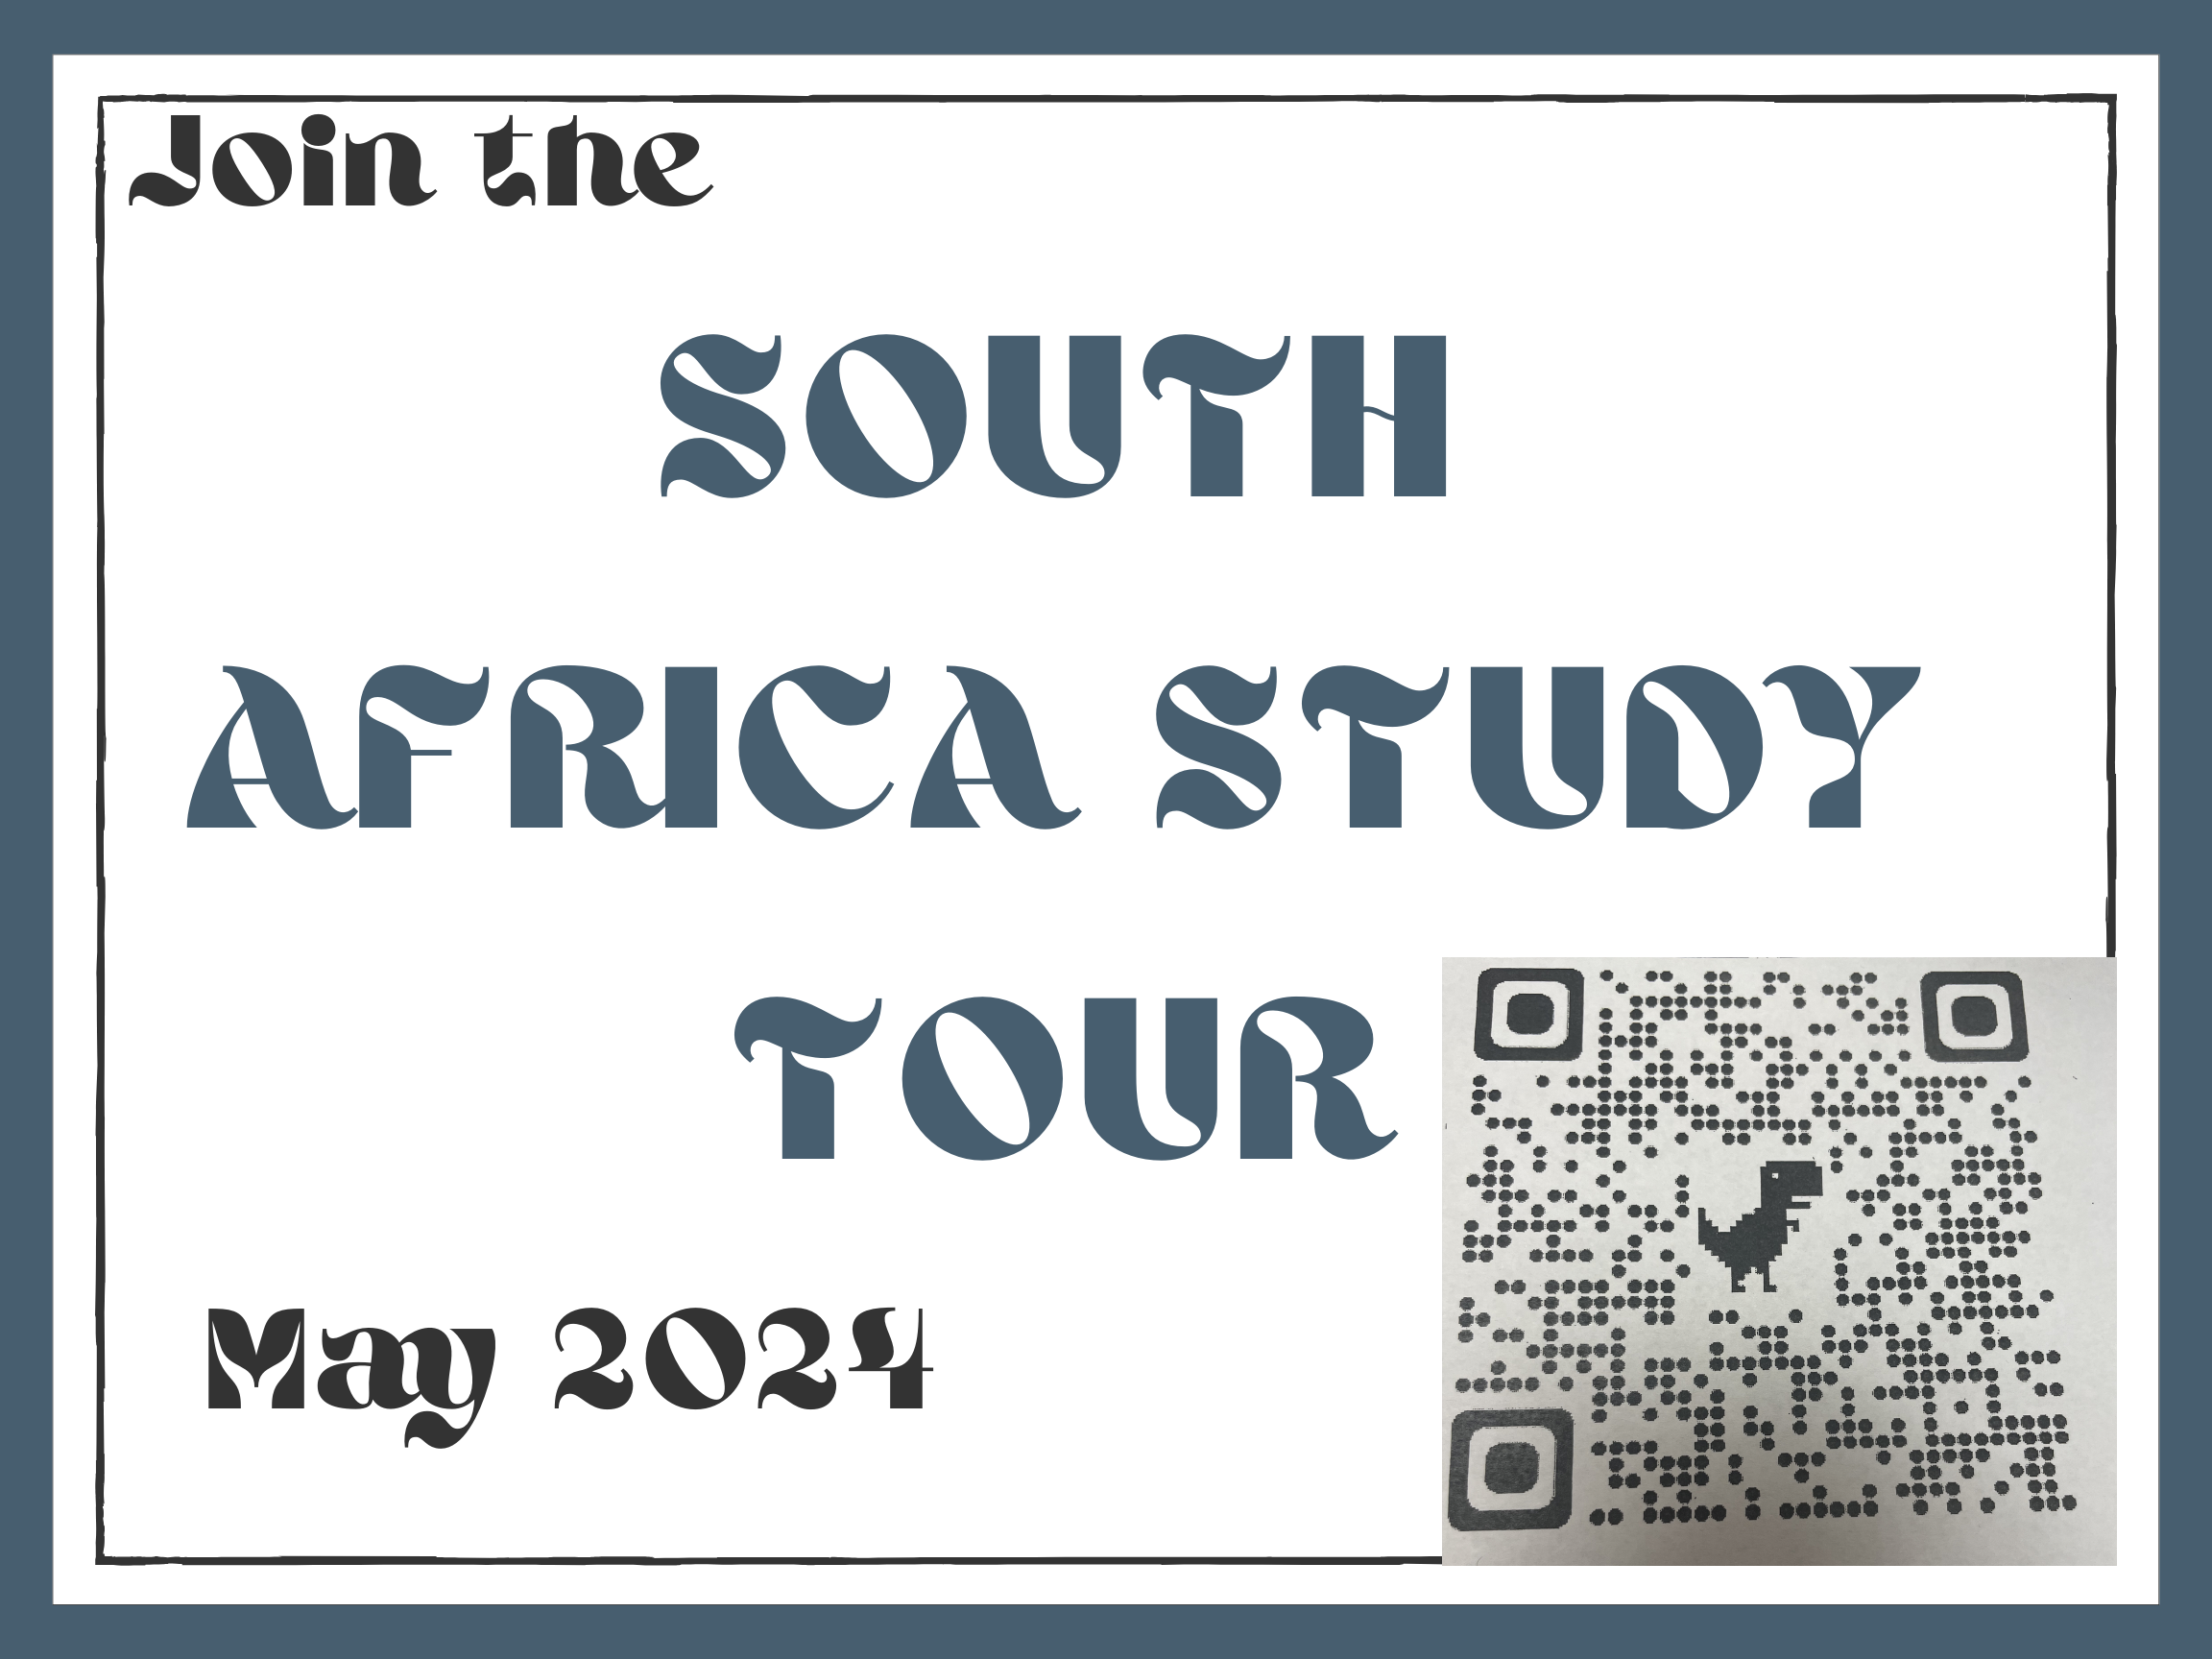 South Africa Tour 2024